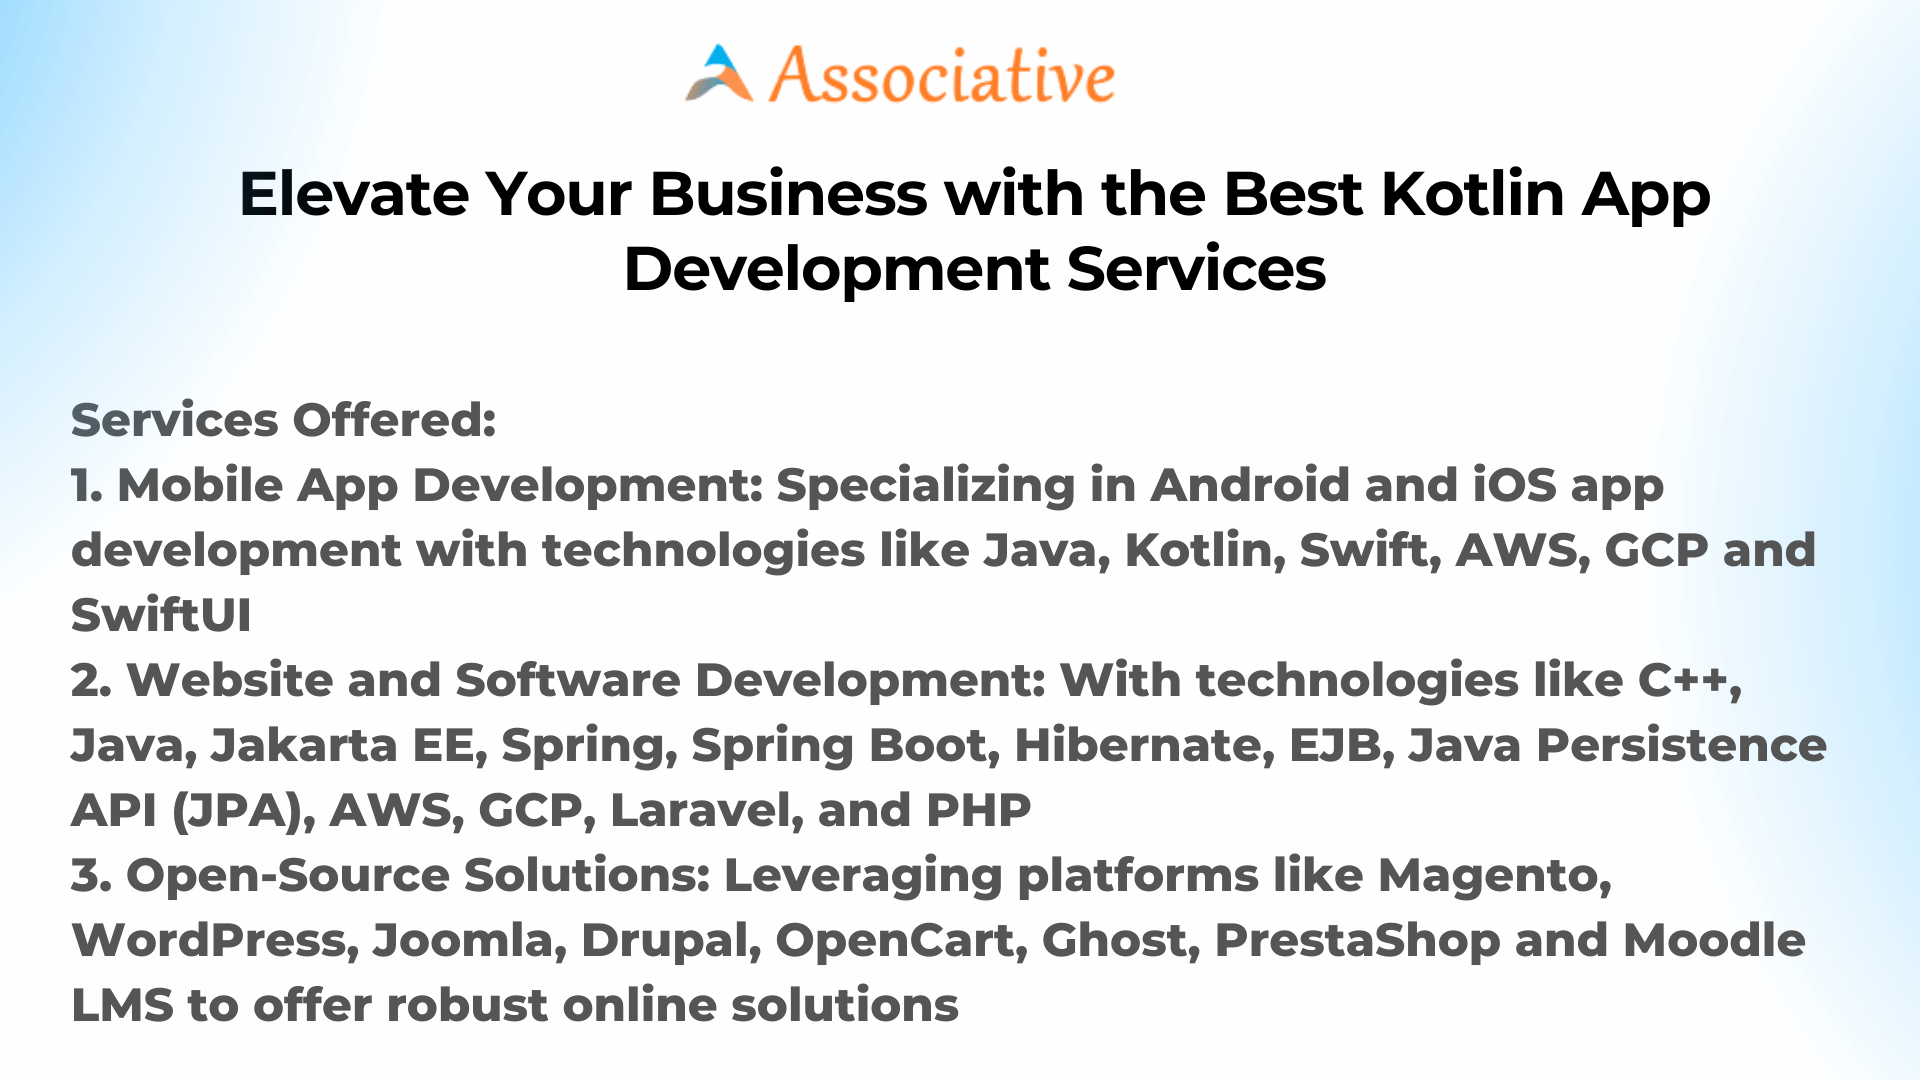 Elevate Your Business with the Best Kotlin App Development Services